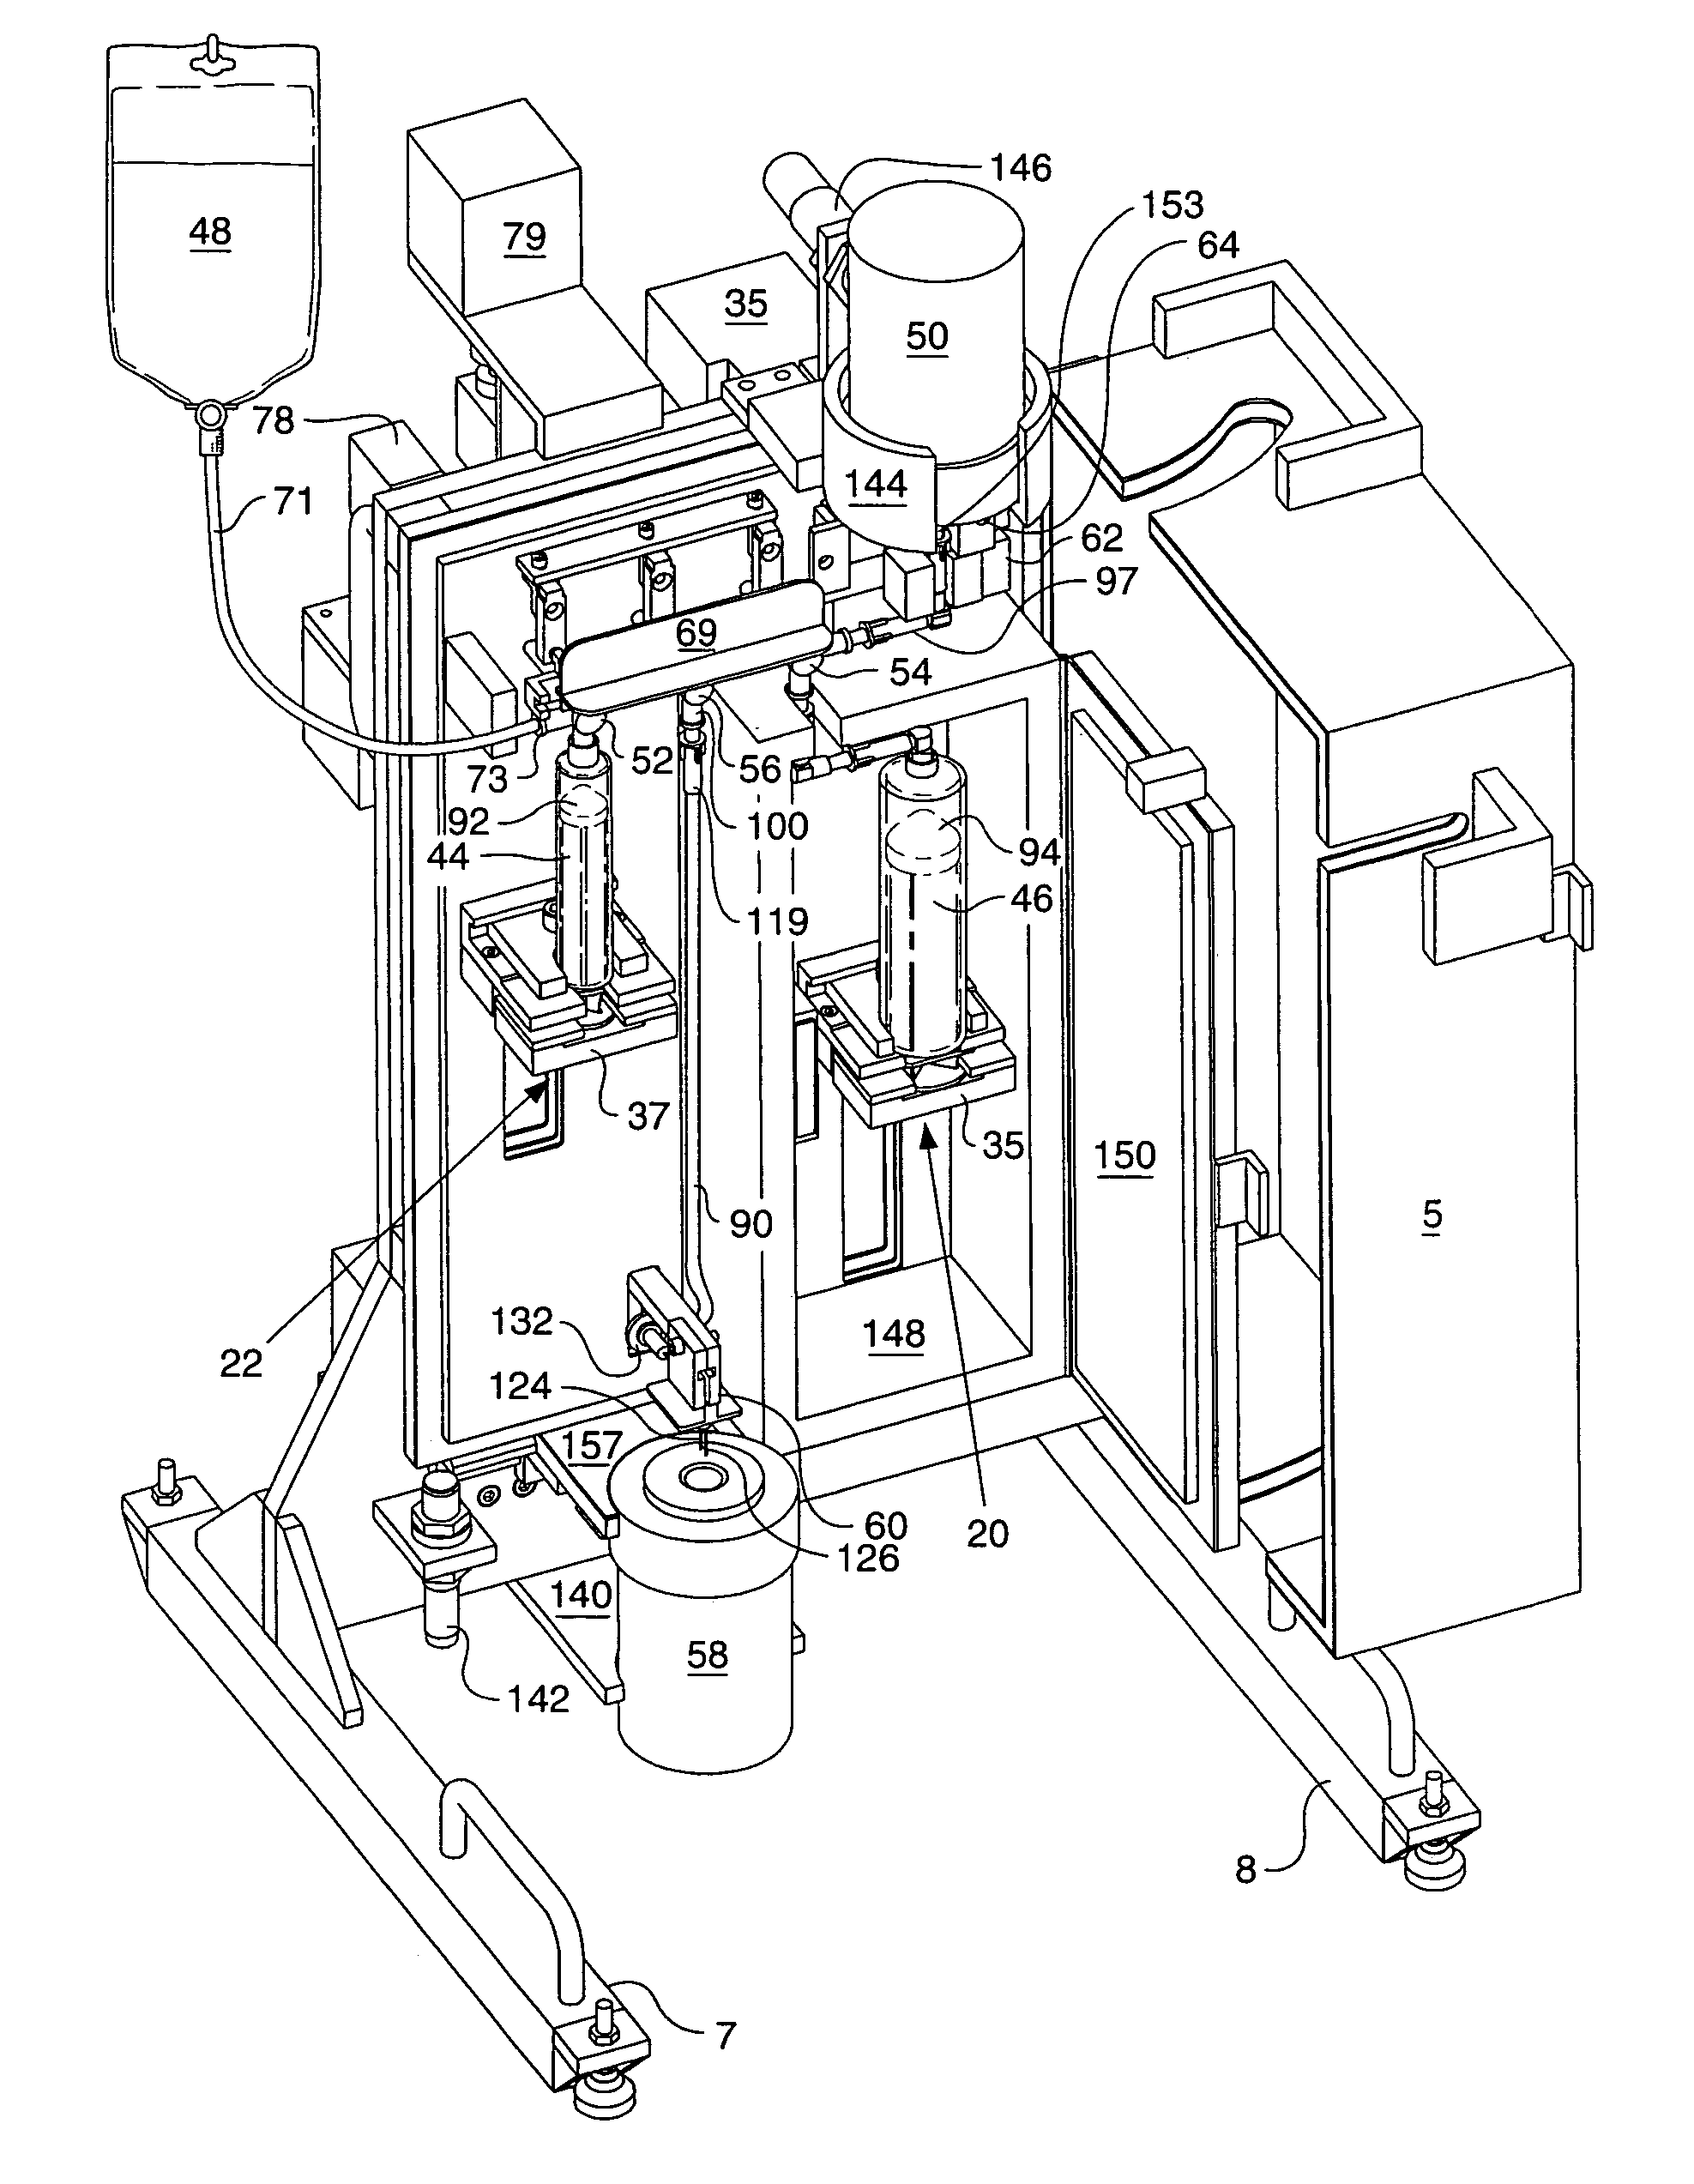 Automated dispensing system and associated method of use